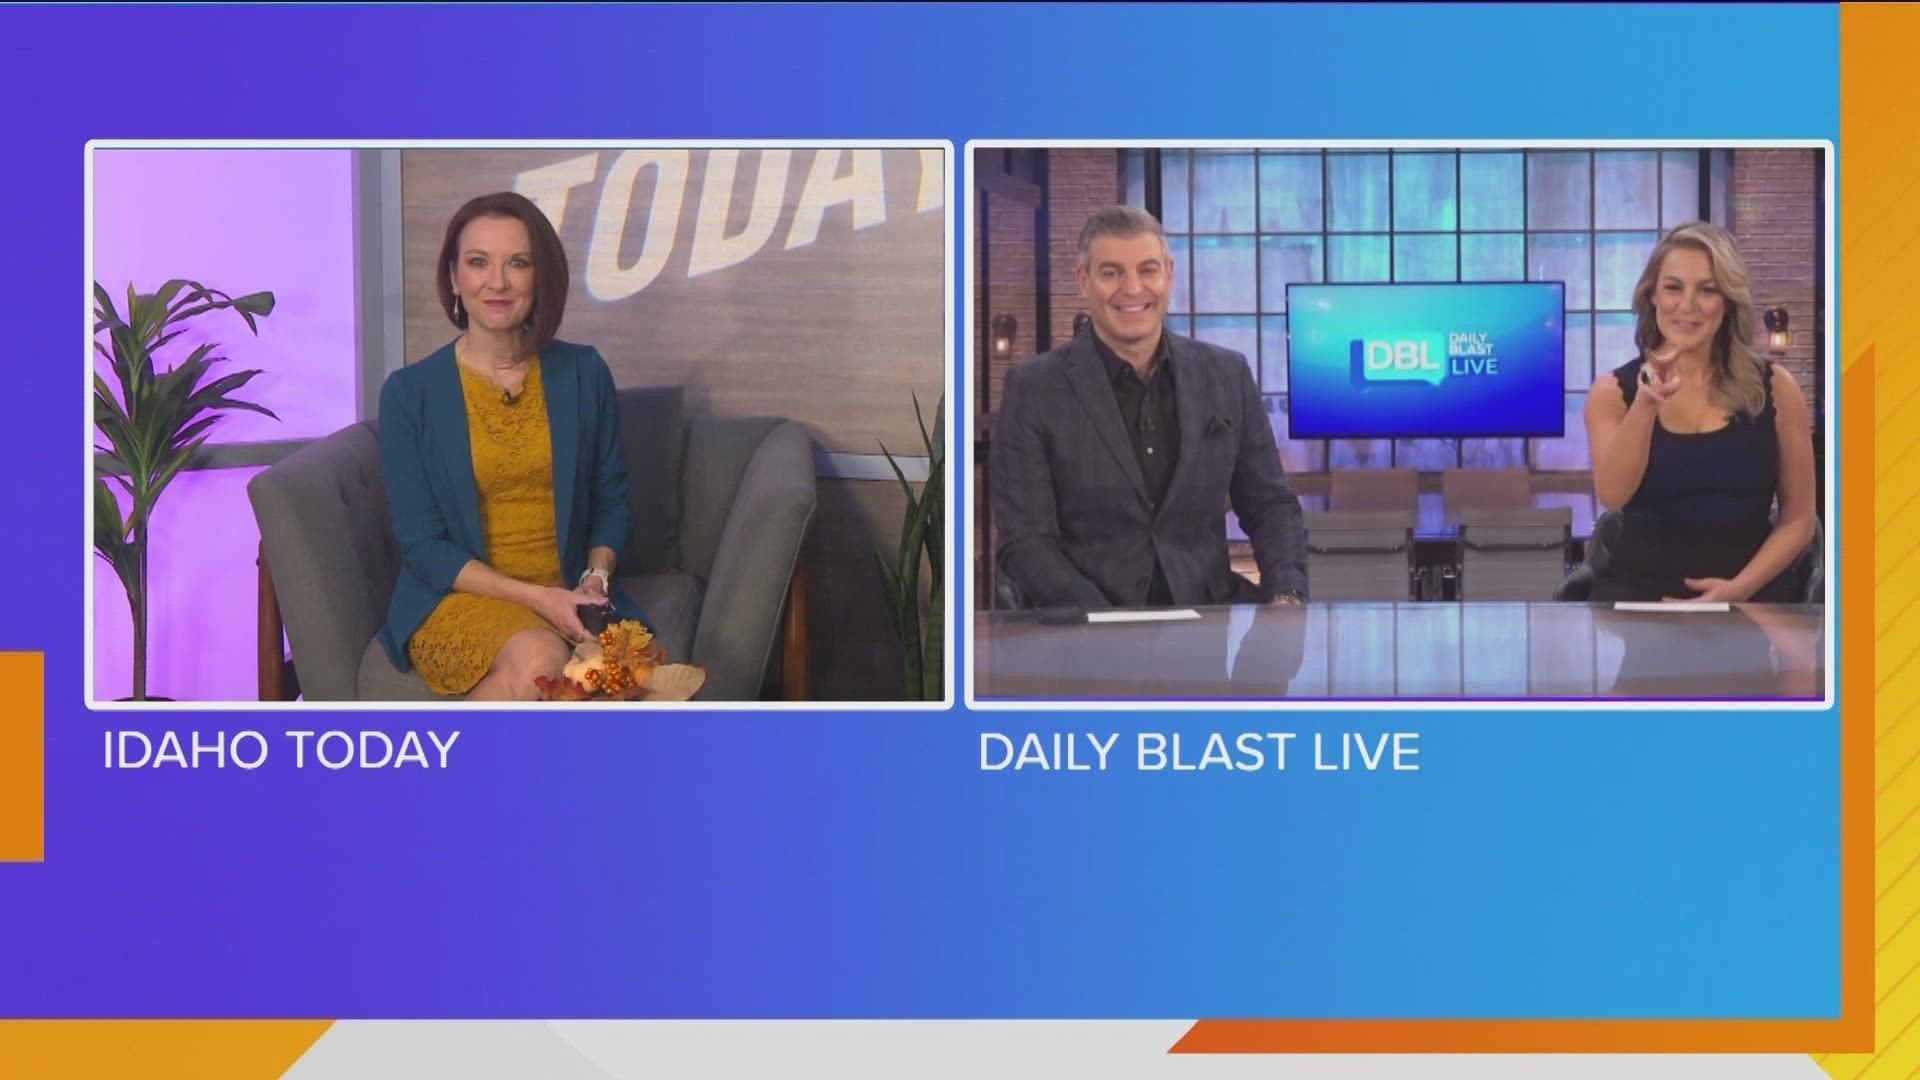 Catch Daily Blast Live weekdays on KTVB Channel 7 at 2PM!